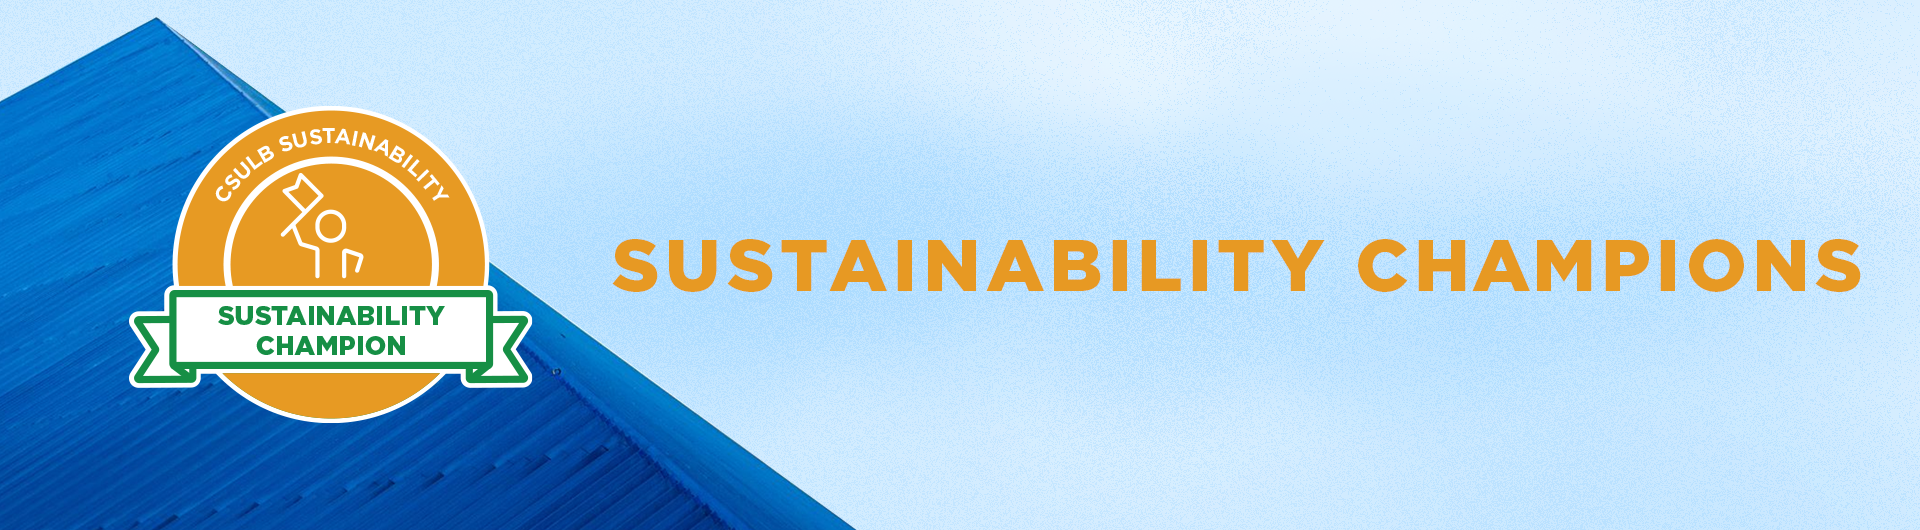 Sustainability Champions banner